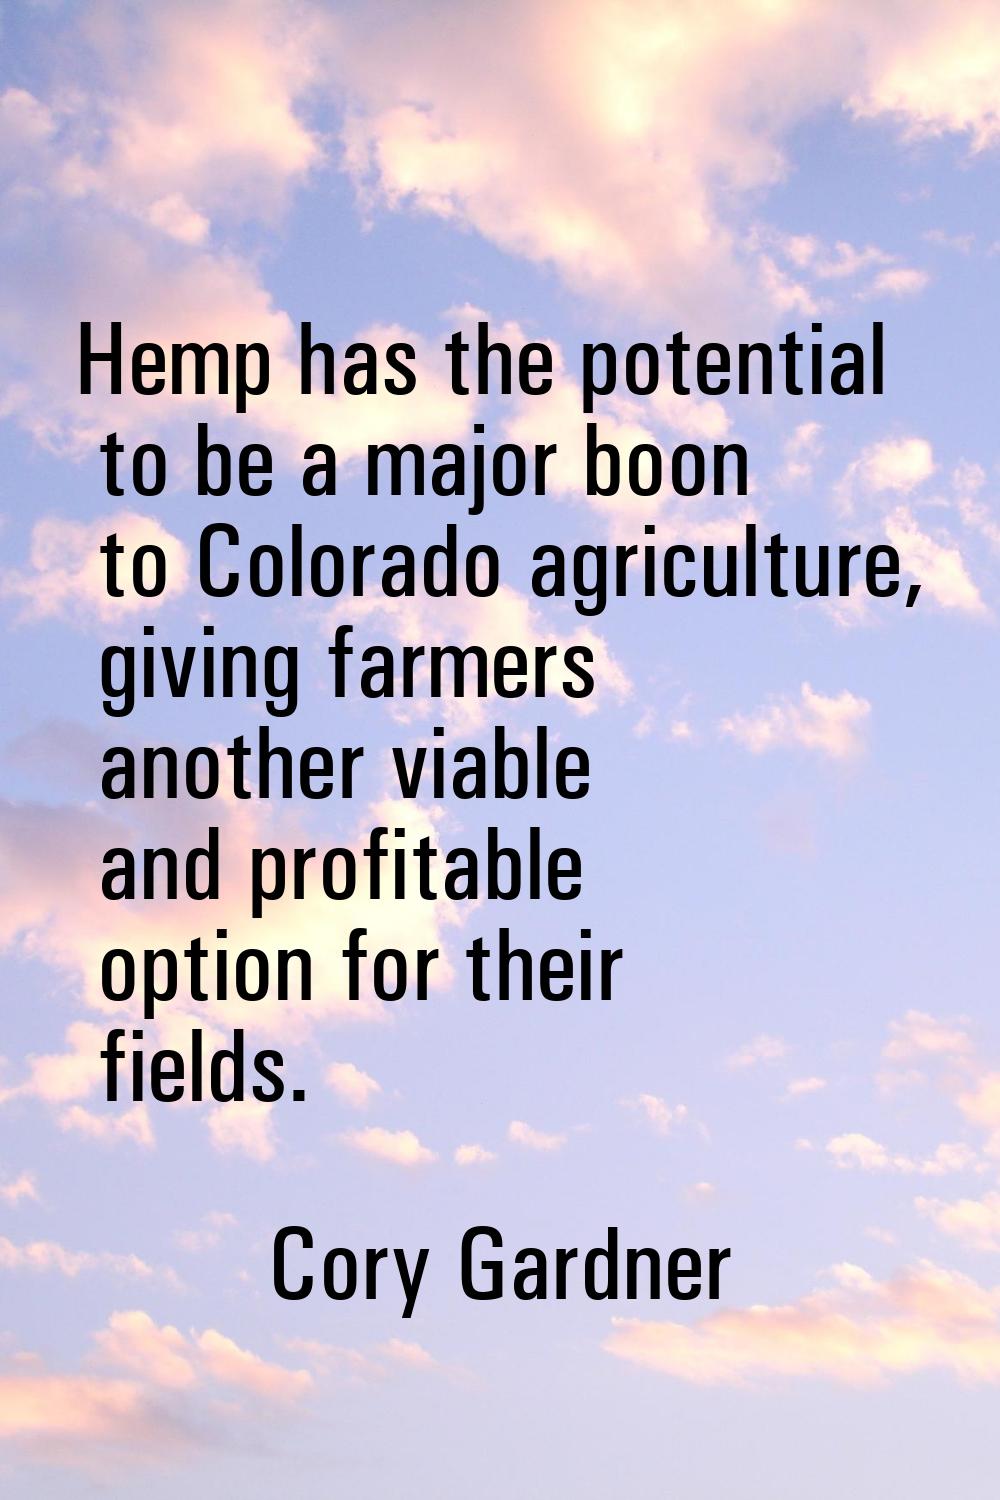 Hemp has the potential to be a major boon to Colorado agriculture, giving farmers another viable an